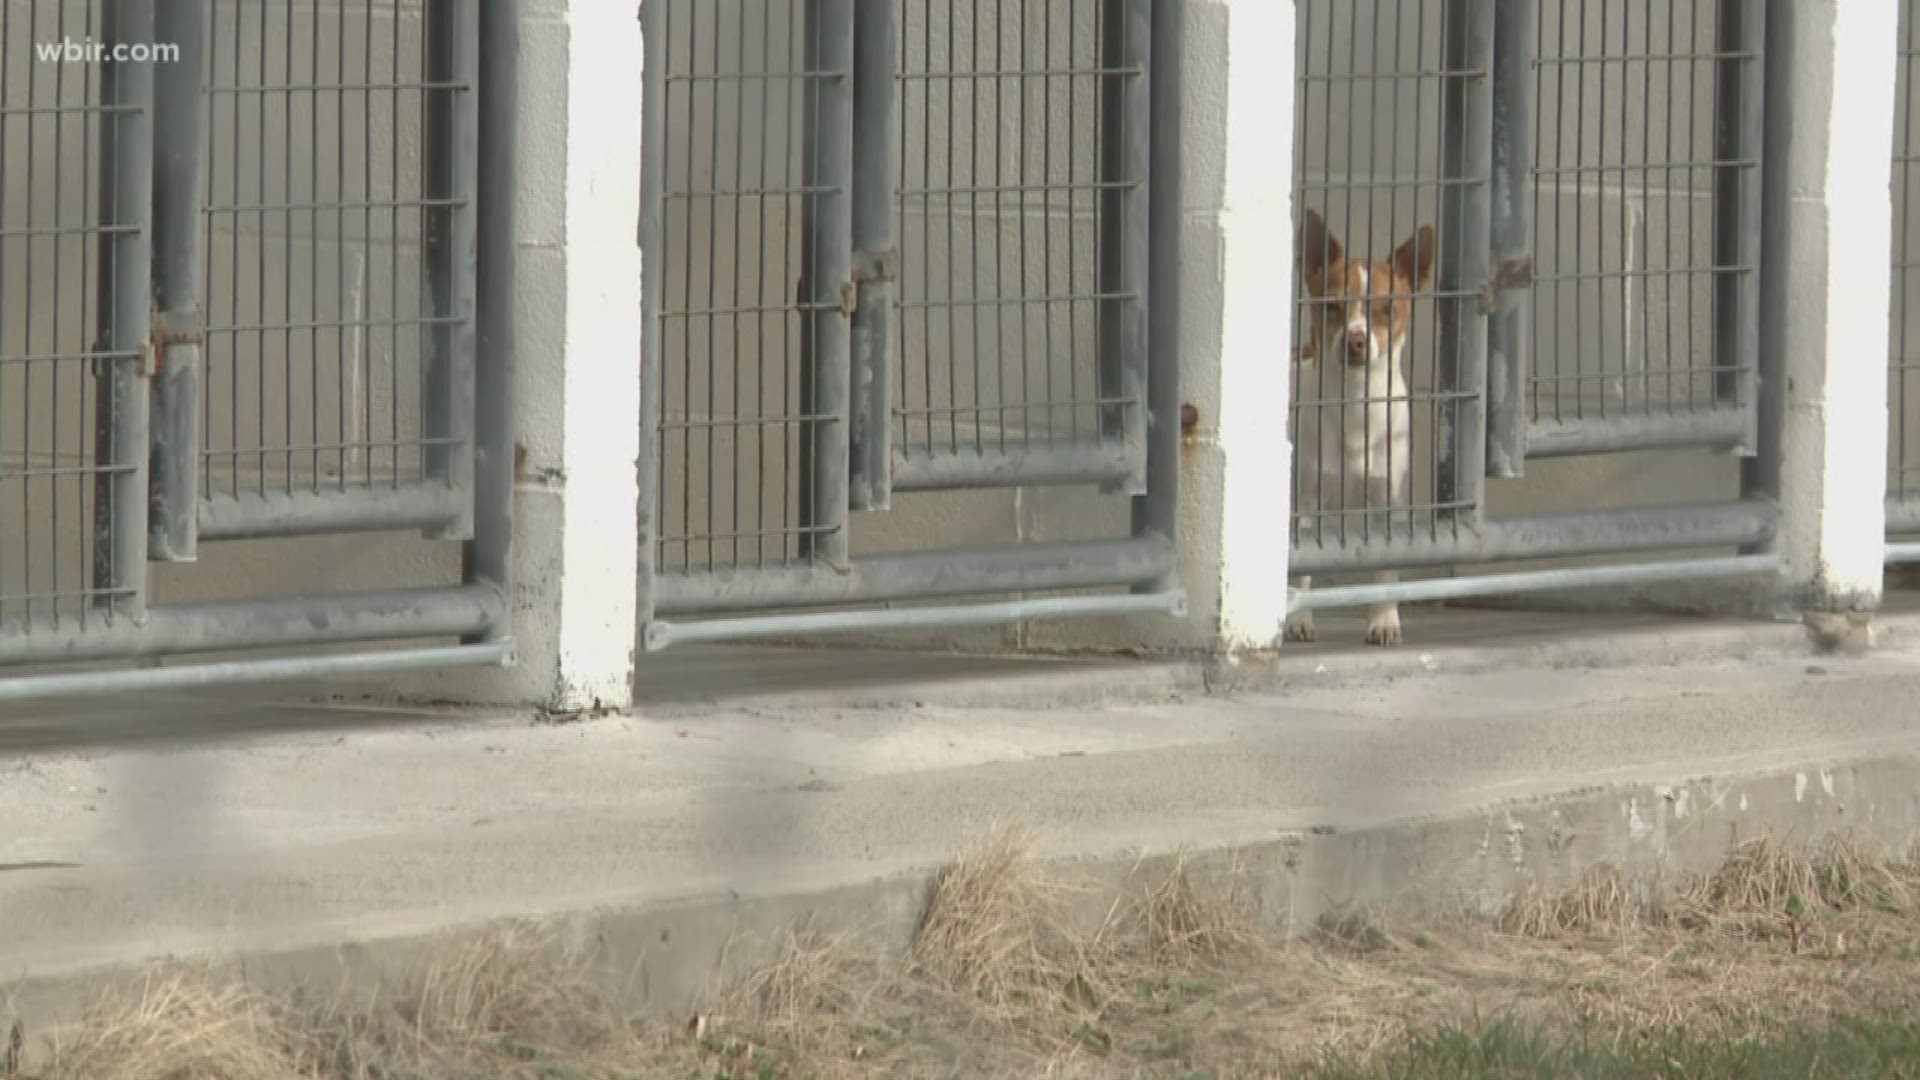 A Claiborne County animal shelter issued a bizarre warning about impostor stealing pets. Leaders said they have heard of several cases so far.